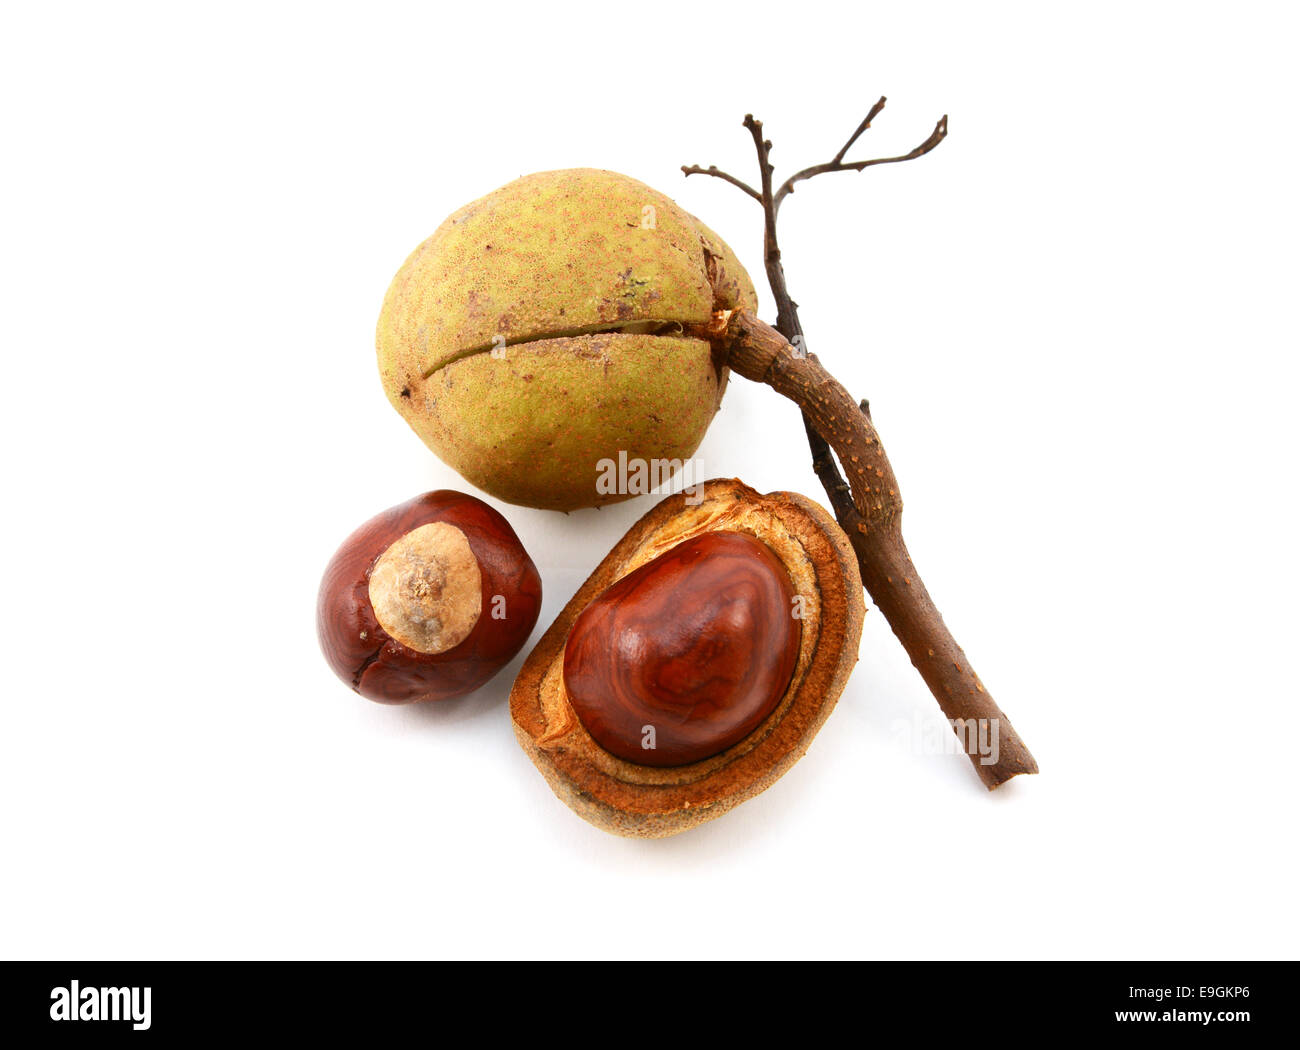 Smooth seed cases and conkers from a red horse chestnut tree, isolated on a white background Stock Photo